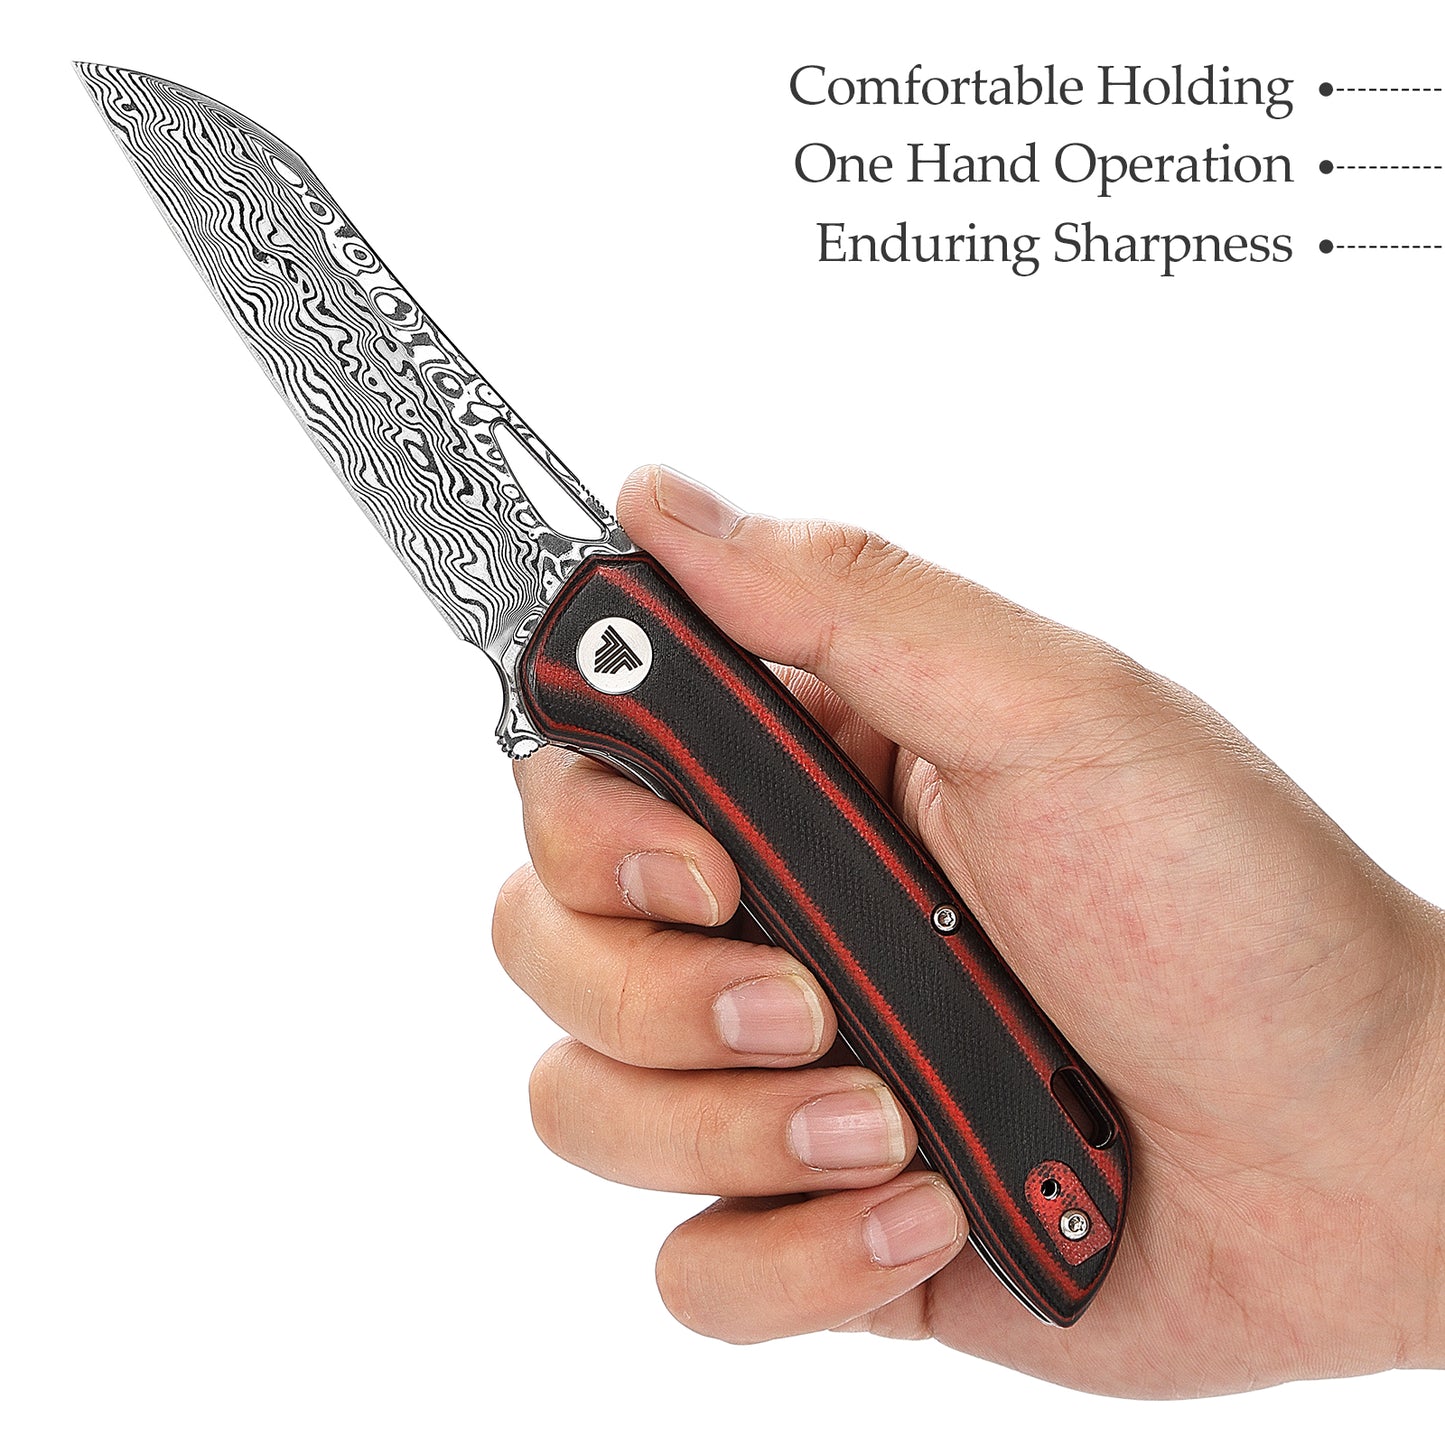 Aries-03RB Liner Lock,3.54"  110 Layers Damascus Steel,G10 Handle